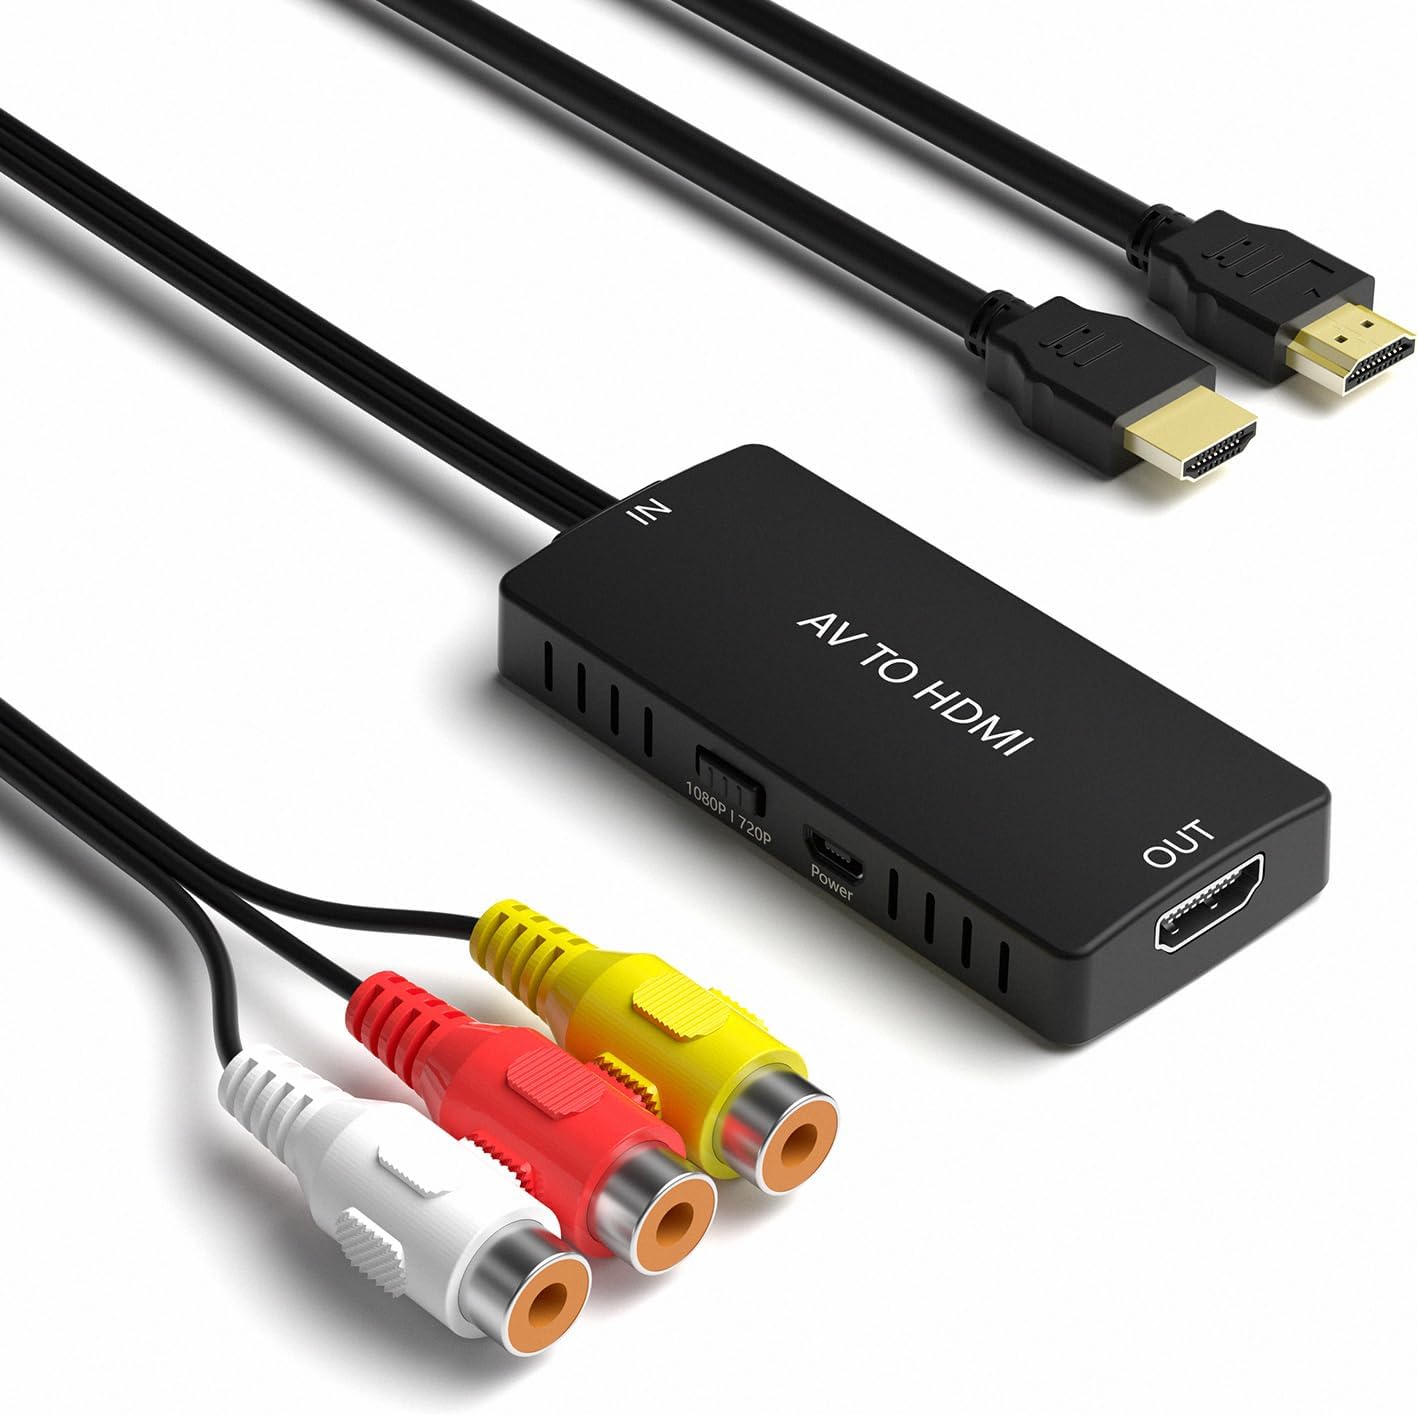 Composite Video (RCA) to HDMI Adapter